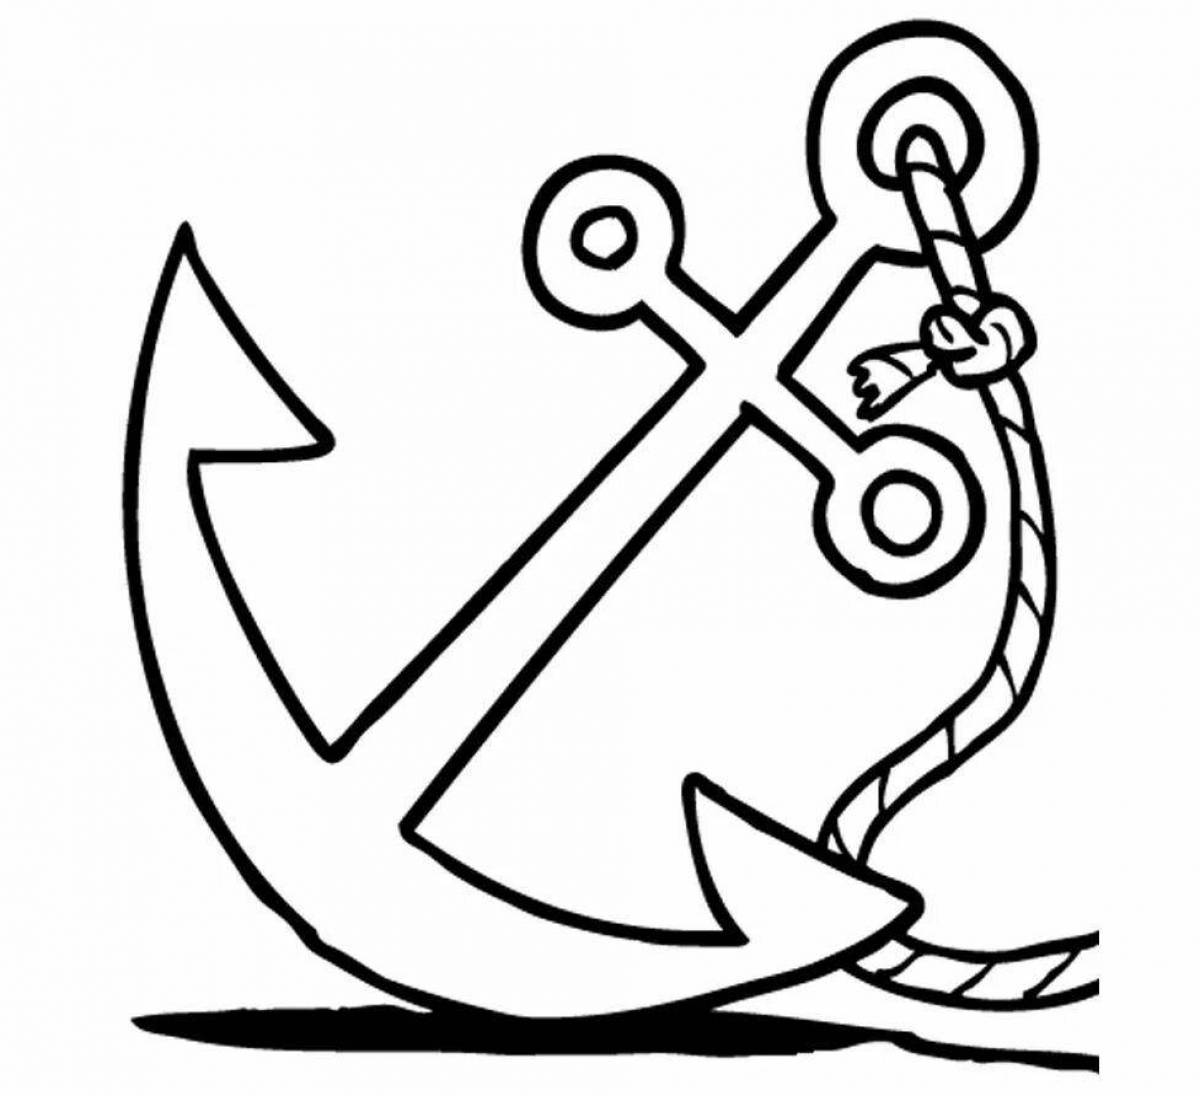 Coloring anchor for children